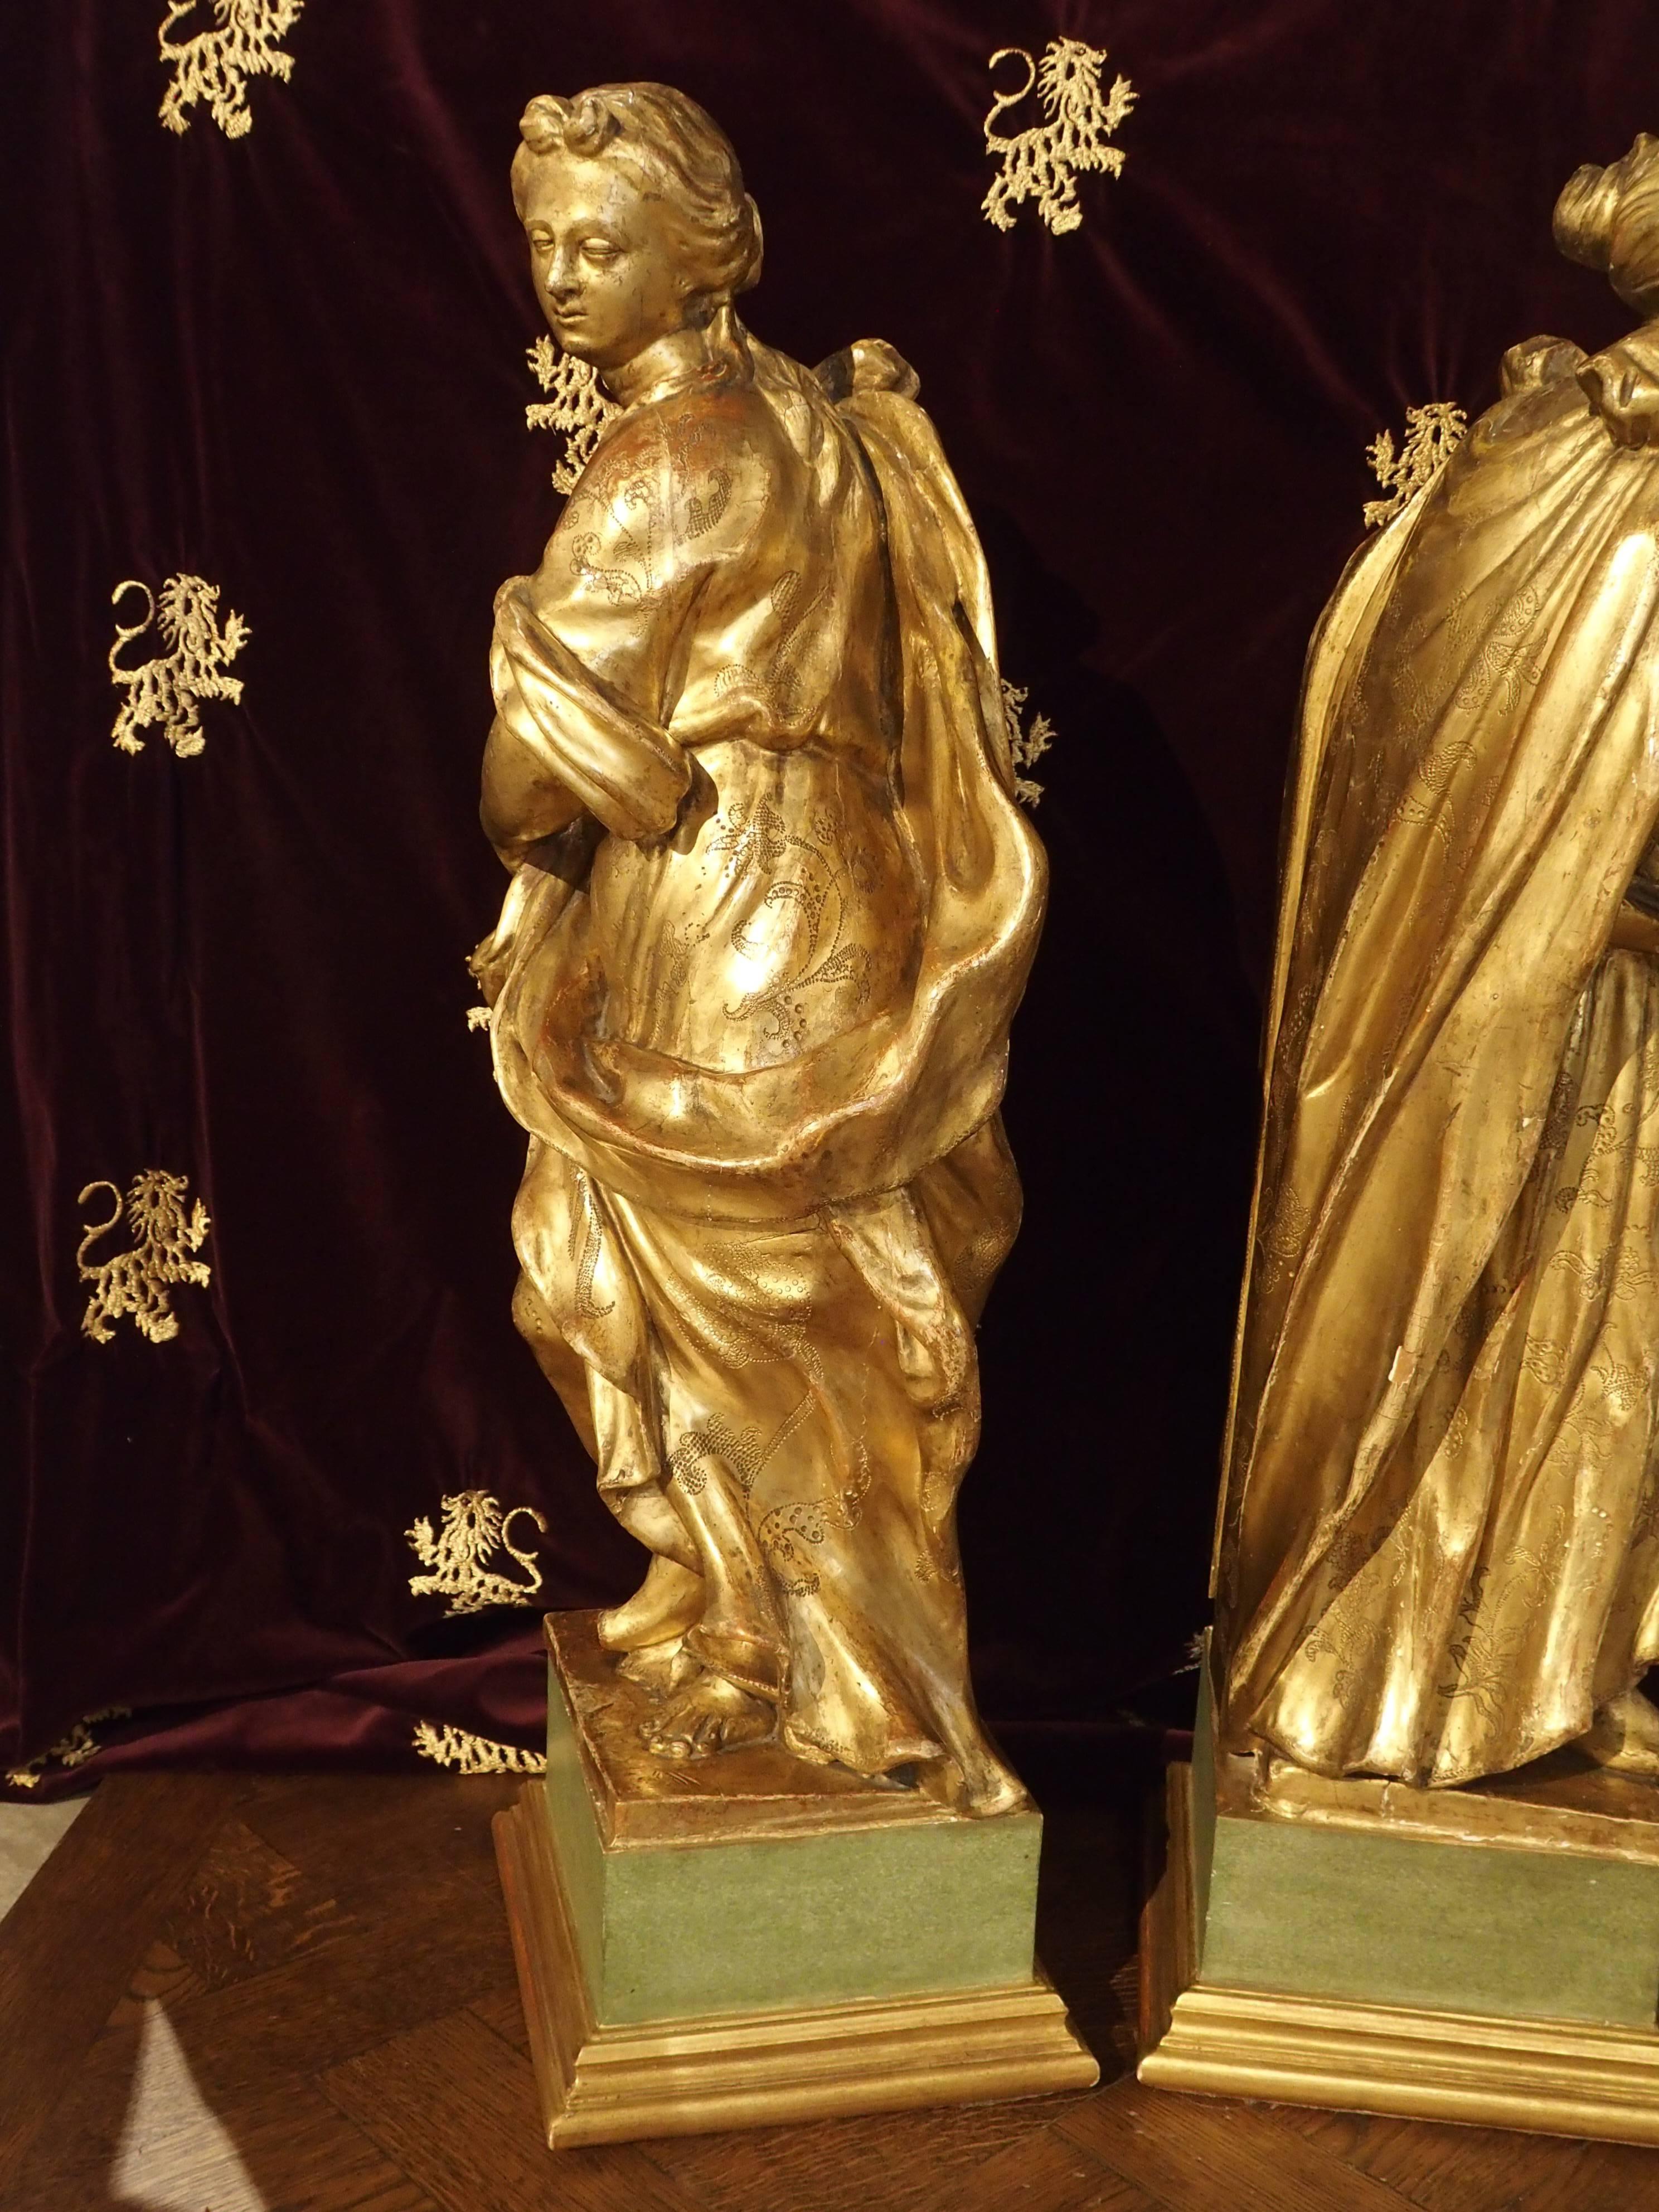 This is a spectacular pair of Italian giltwood statues featuring two women wearing impressive robes. Areas of red bole shows beneath the gilding. The carver has hand punched varying beautiful design motifs on a solid background. One woman wears a